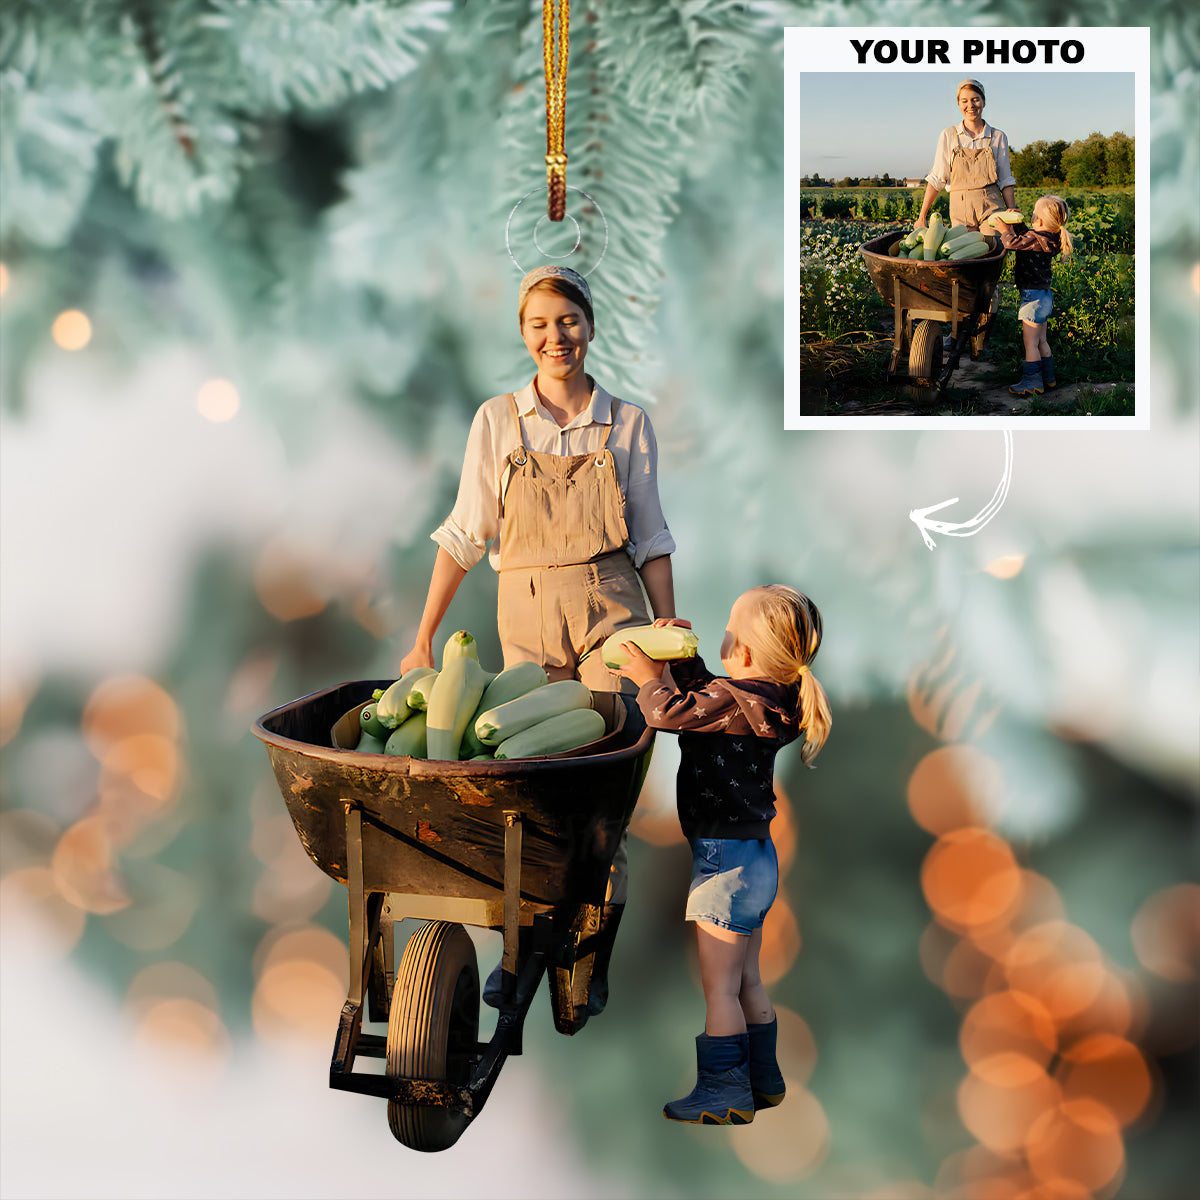 Chores Time With Kids - Personalized Photo Mica Ornament - Customized Your Photo Ornament - Christmas Gift For Mom, Grandma, Family, Family Members